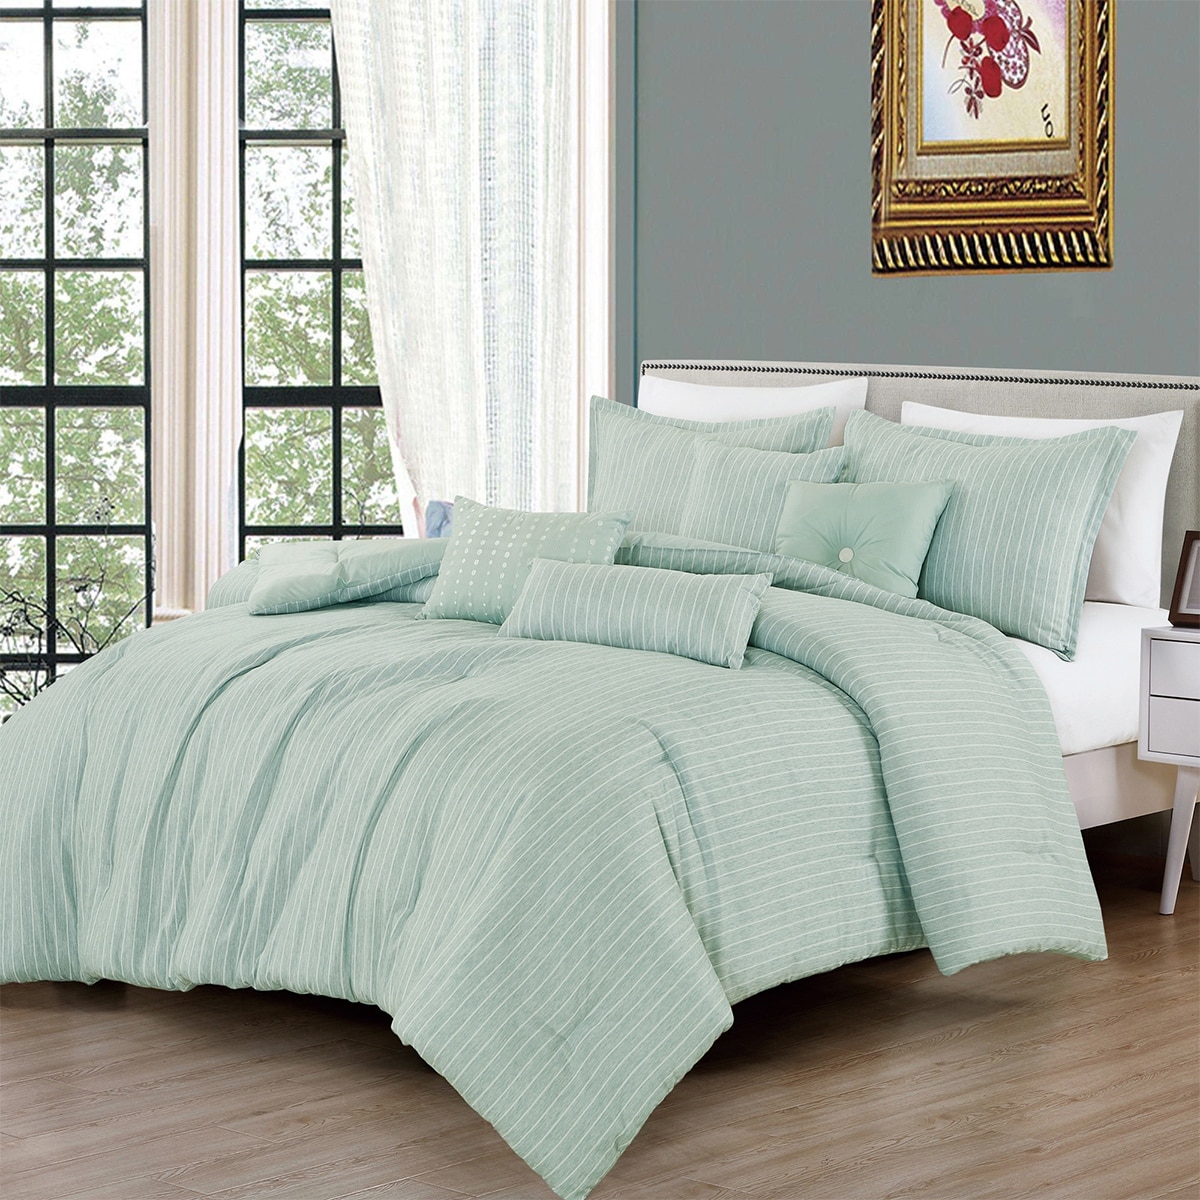 Luxurious  7-Piece  Comforters & Sets Embroidery Bamboo Bedding Comforter Set. 